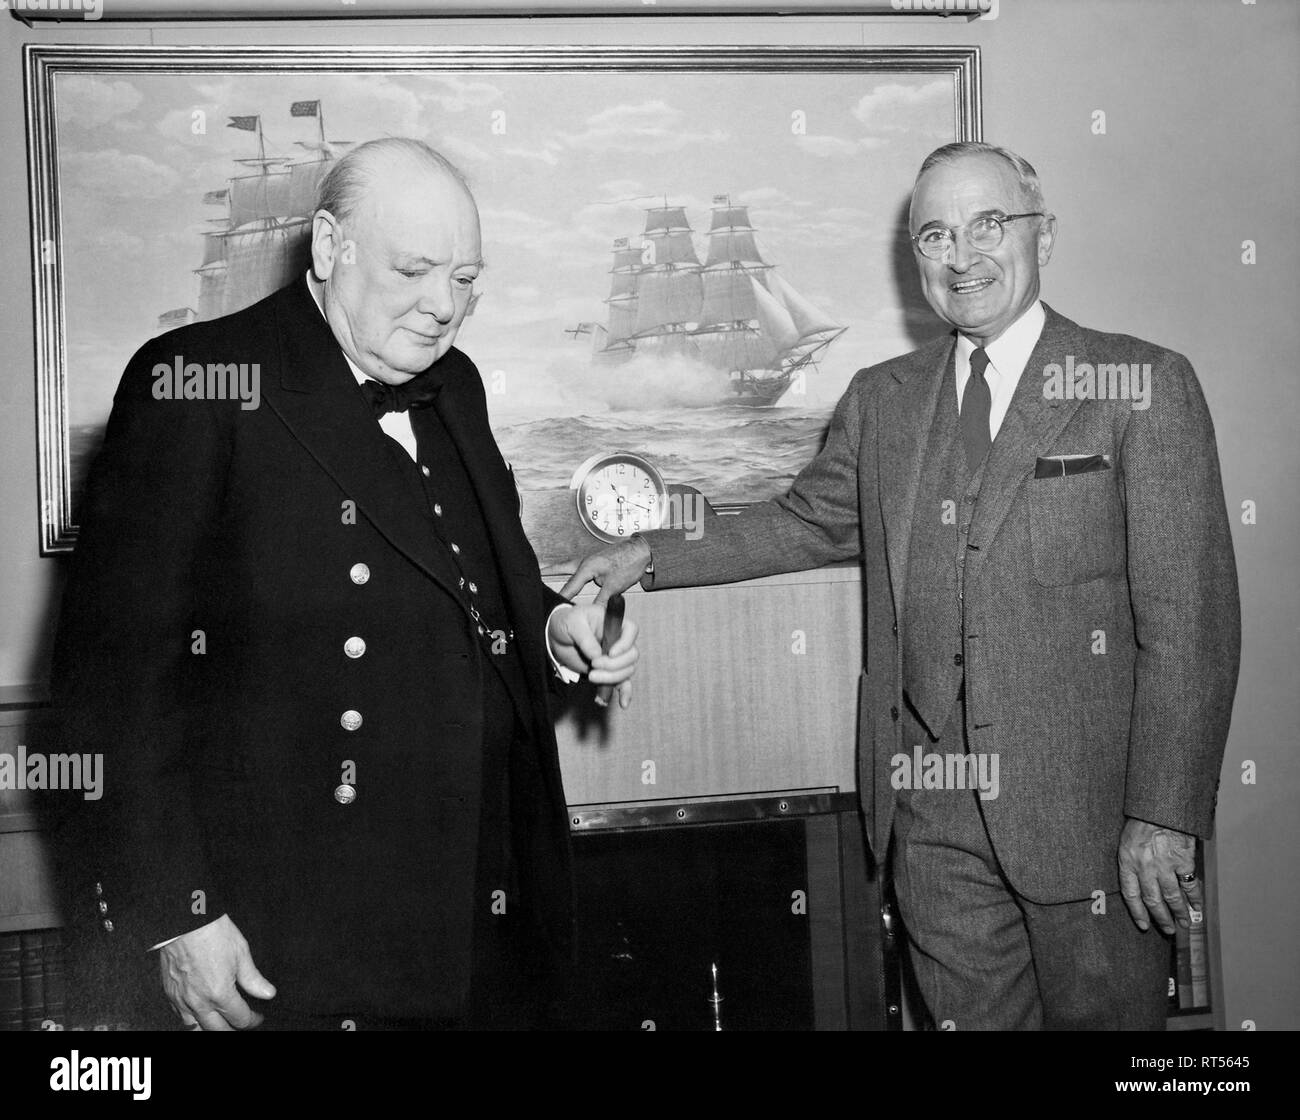 UK Prime Minister Winston Churchill and U.S. President Harry S. Truman during a moment on the Presidential Yacht. Stock Photo